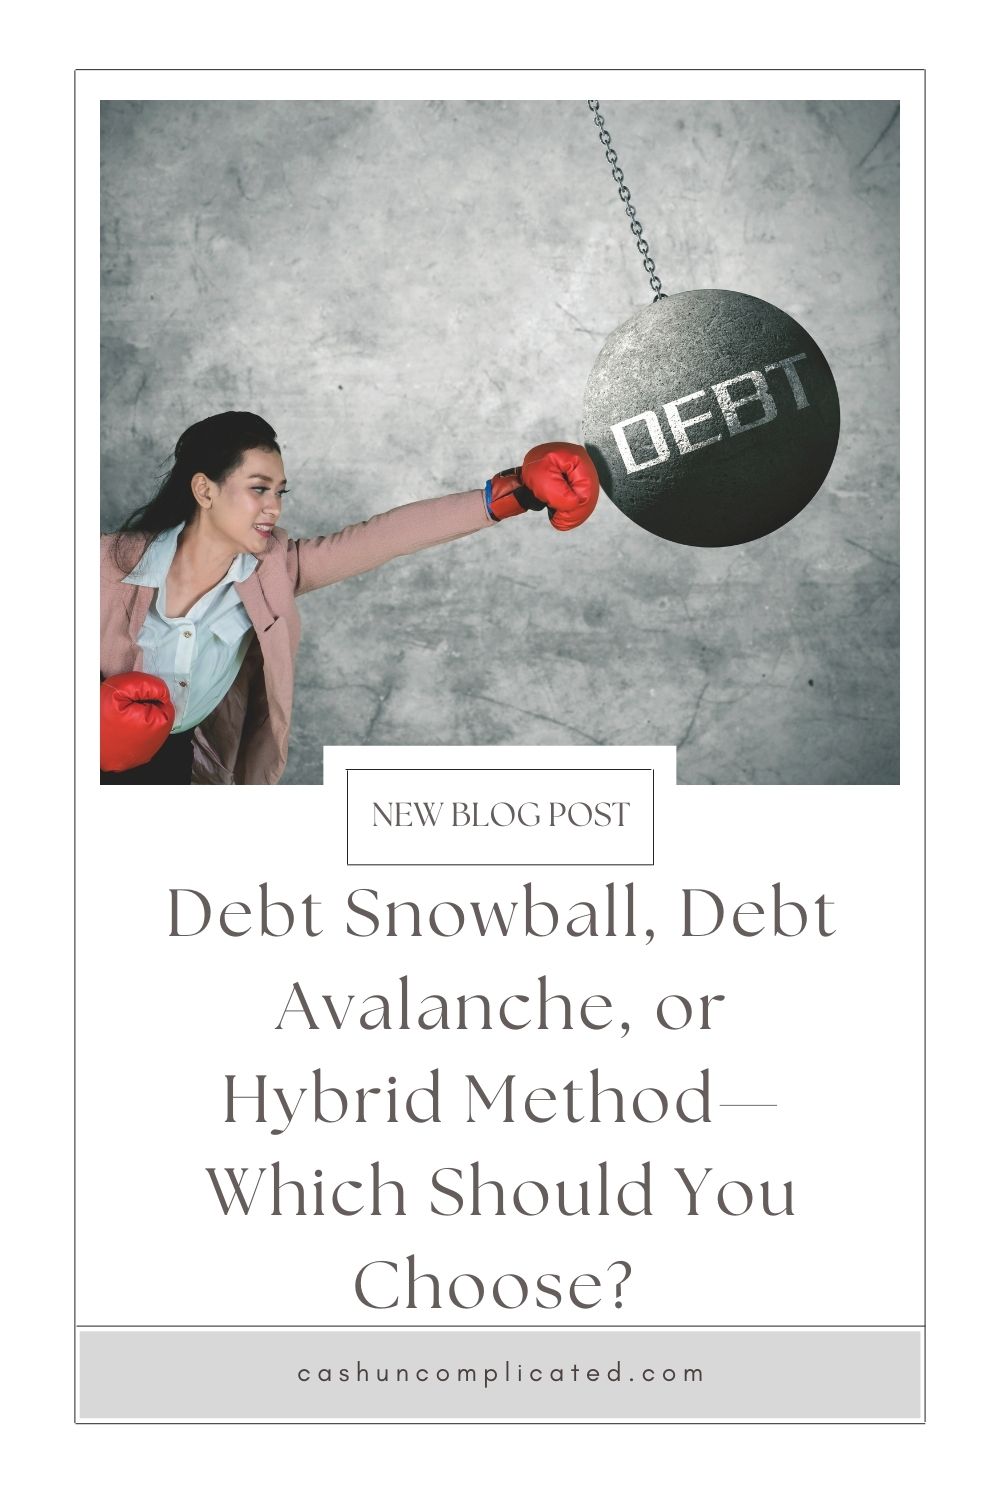 Woman with boxing gloves hitting punching bag that has the word debt on it